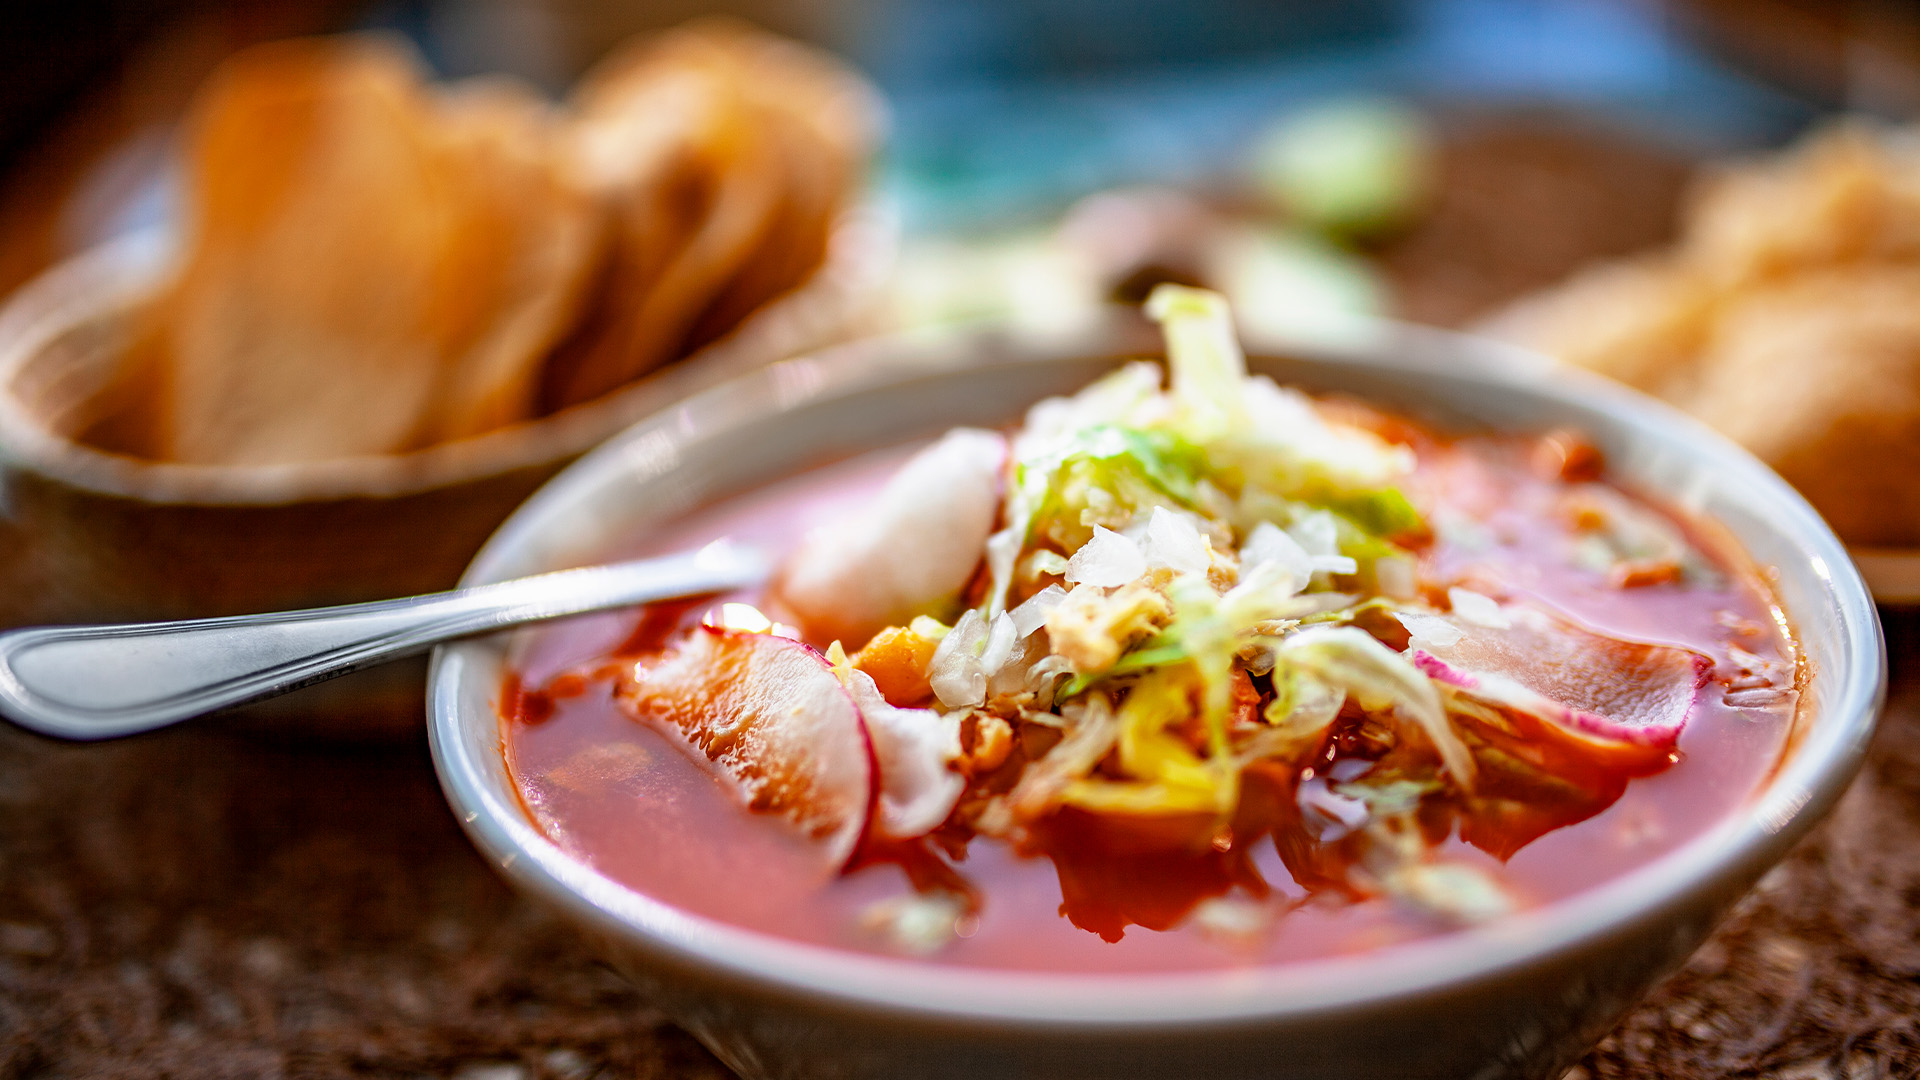 A man died in the pozole eating contest organized by the city council (Photo: Getty Images)